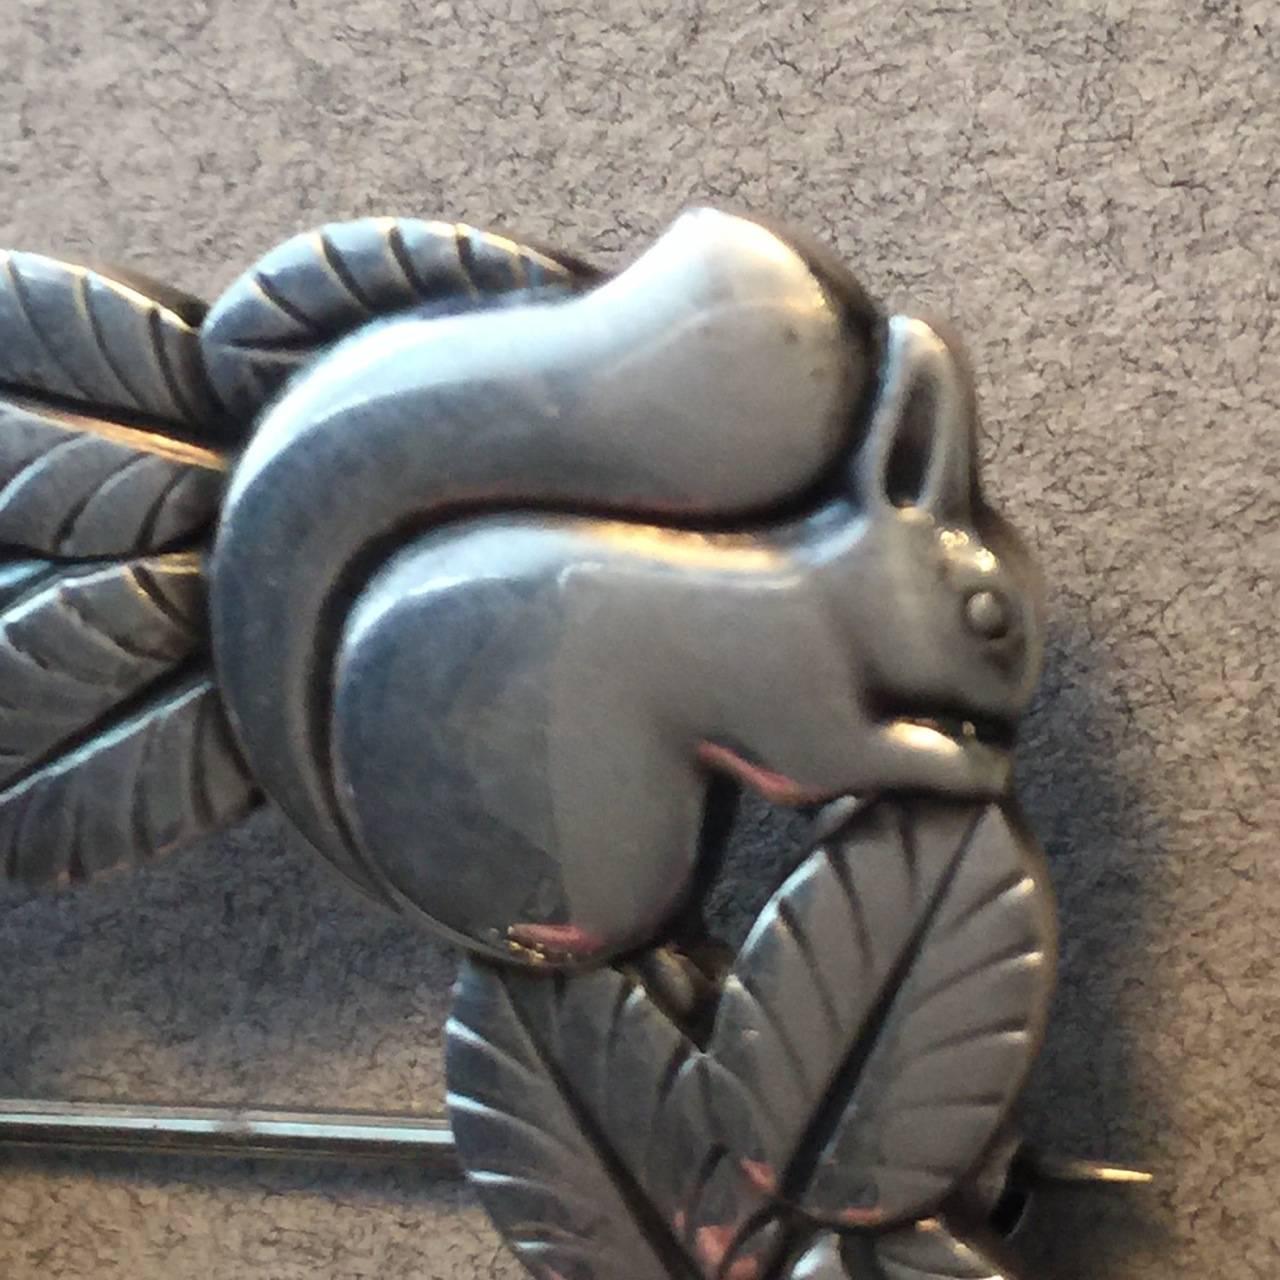 Georg Jensen Sterling Silver Deer and Squirrel Brooch No. 318 by Arno Malinowski

Intricately detailed, open squared brooch that featured a deer resting before a squirrel in foliage. Very well-made with gorgeous patina.

Dimensions: 1.5"